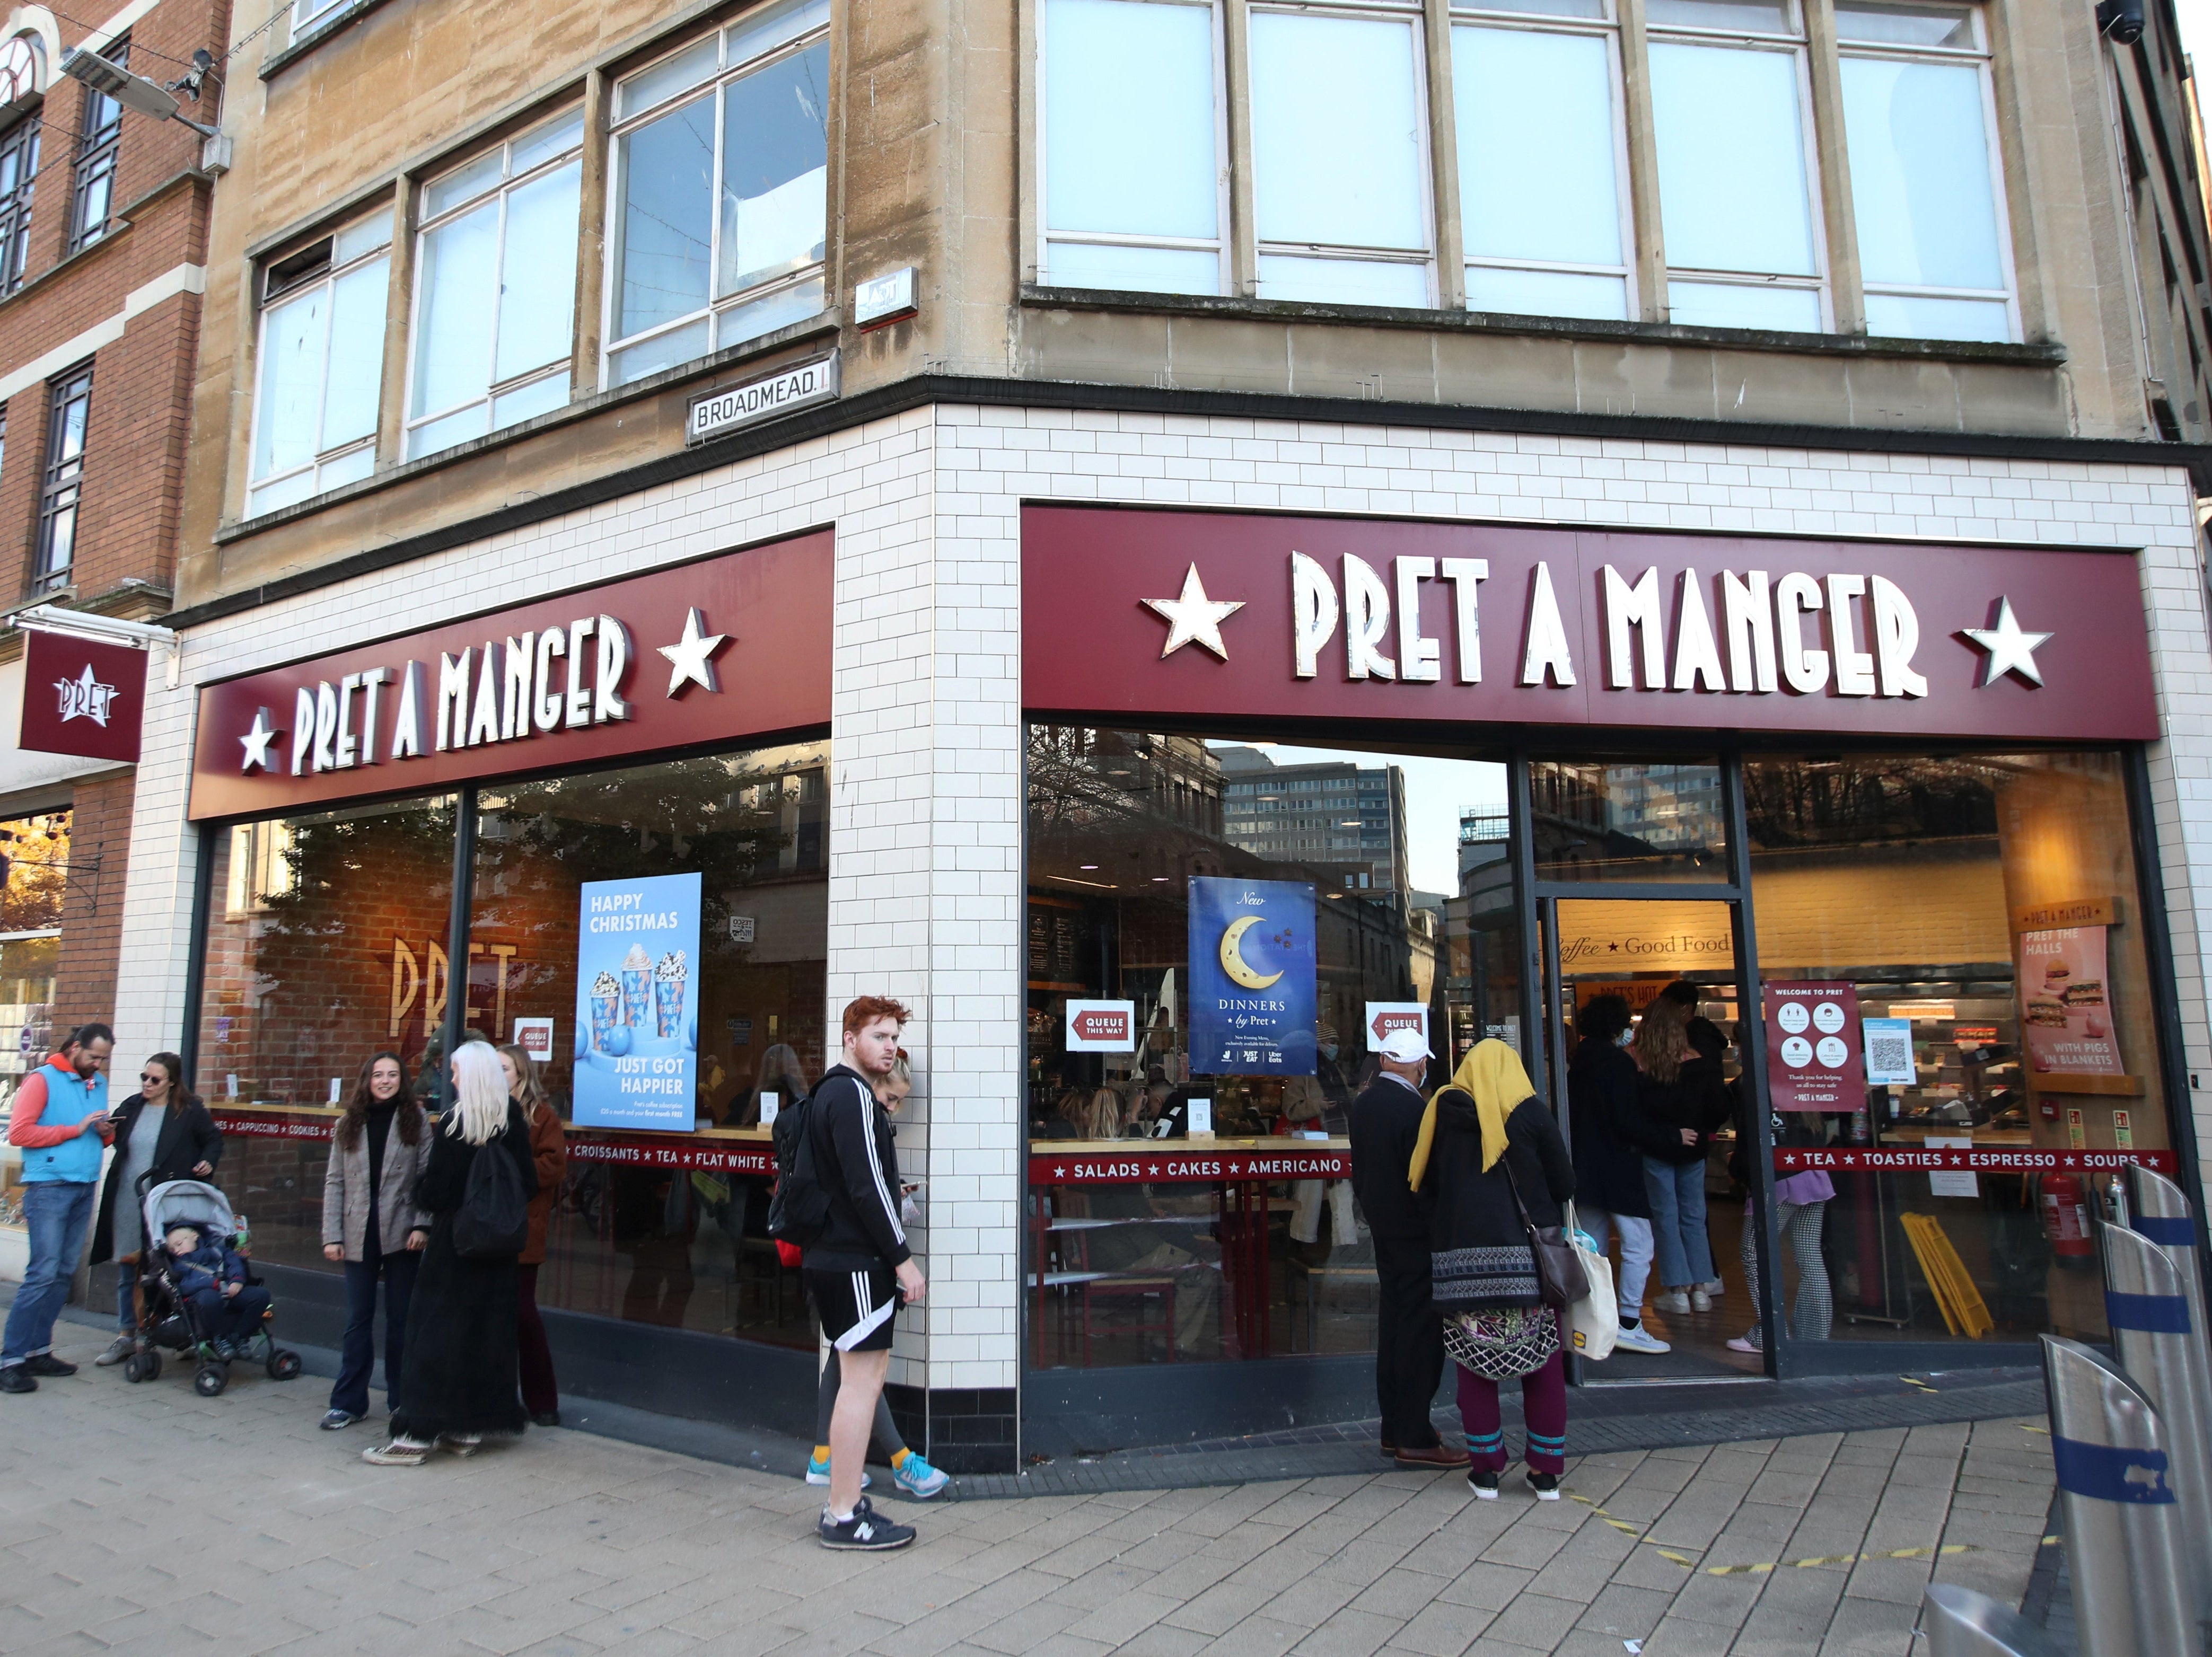 Pret’s sales have fallen sharply during the pandemic and have yet to recover after restrictions eased